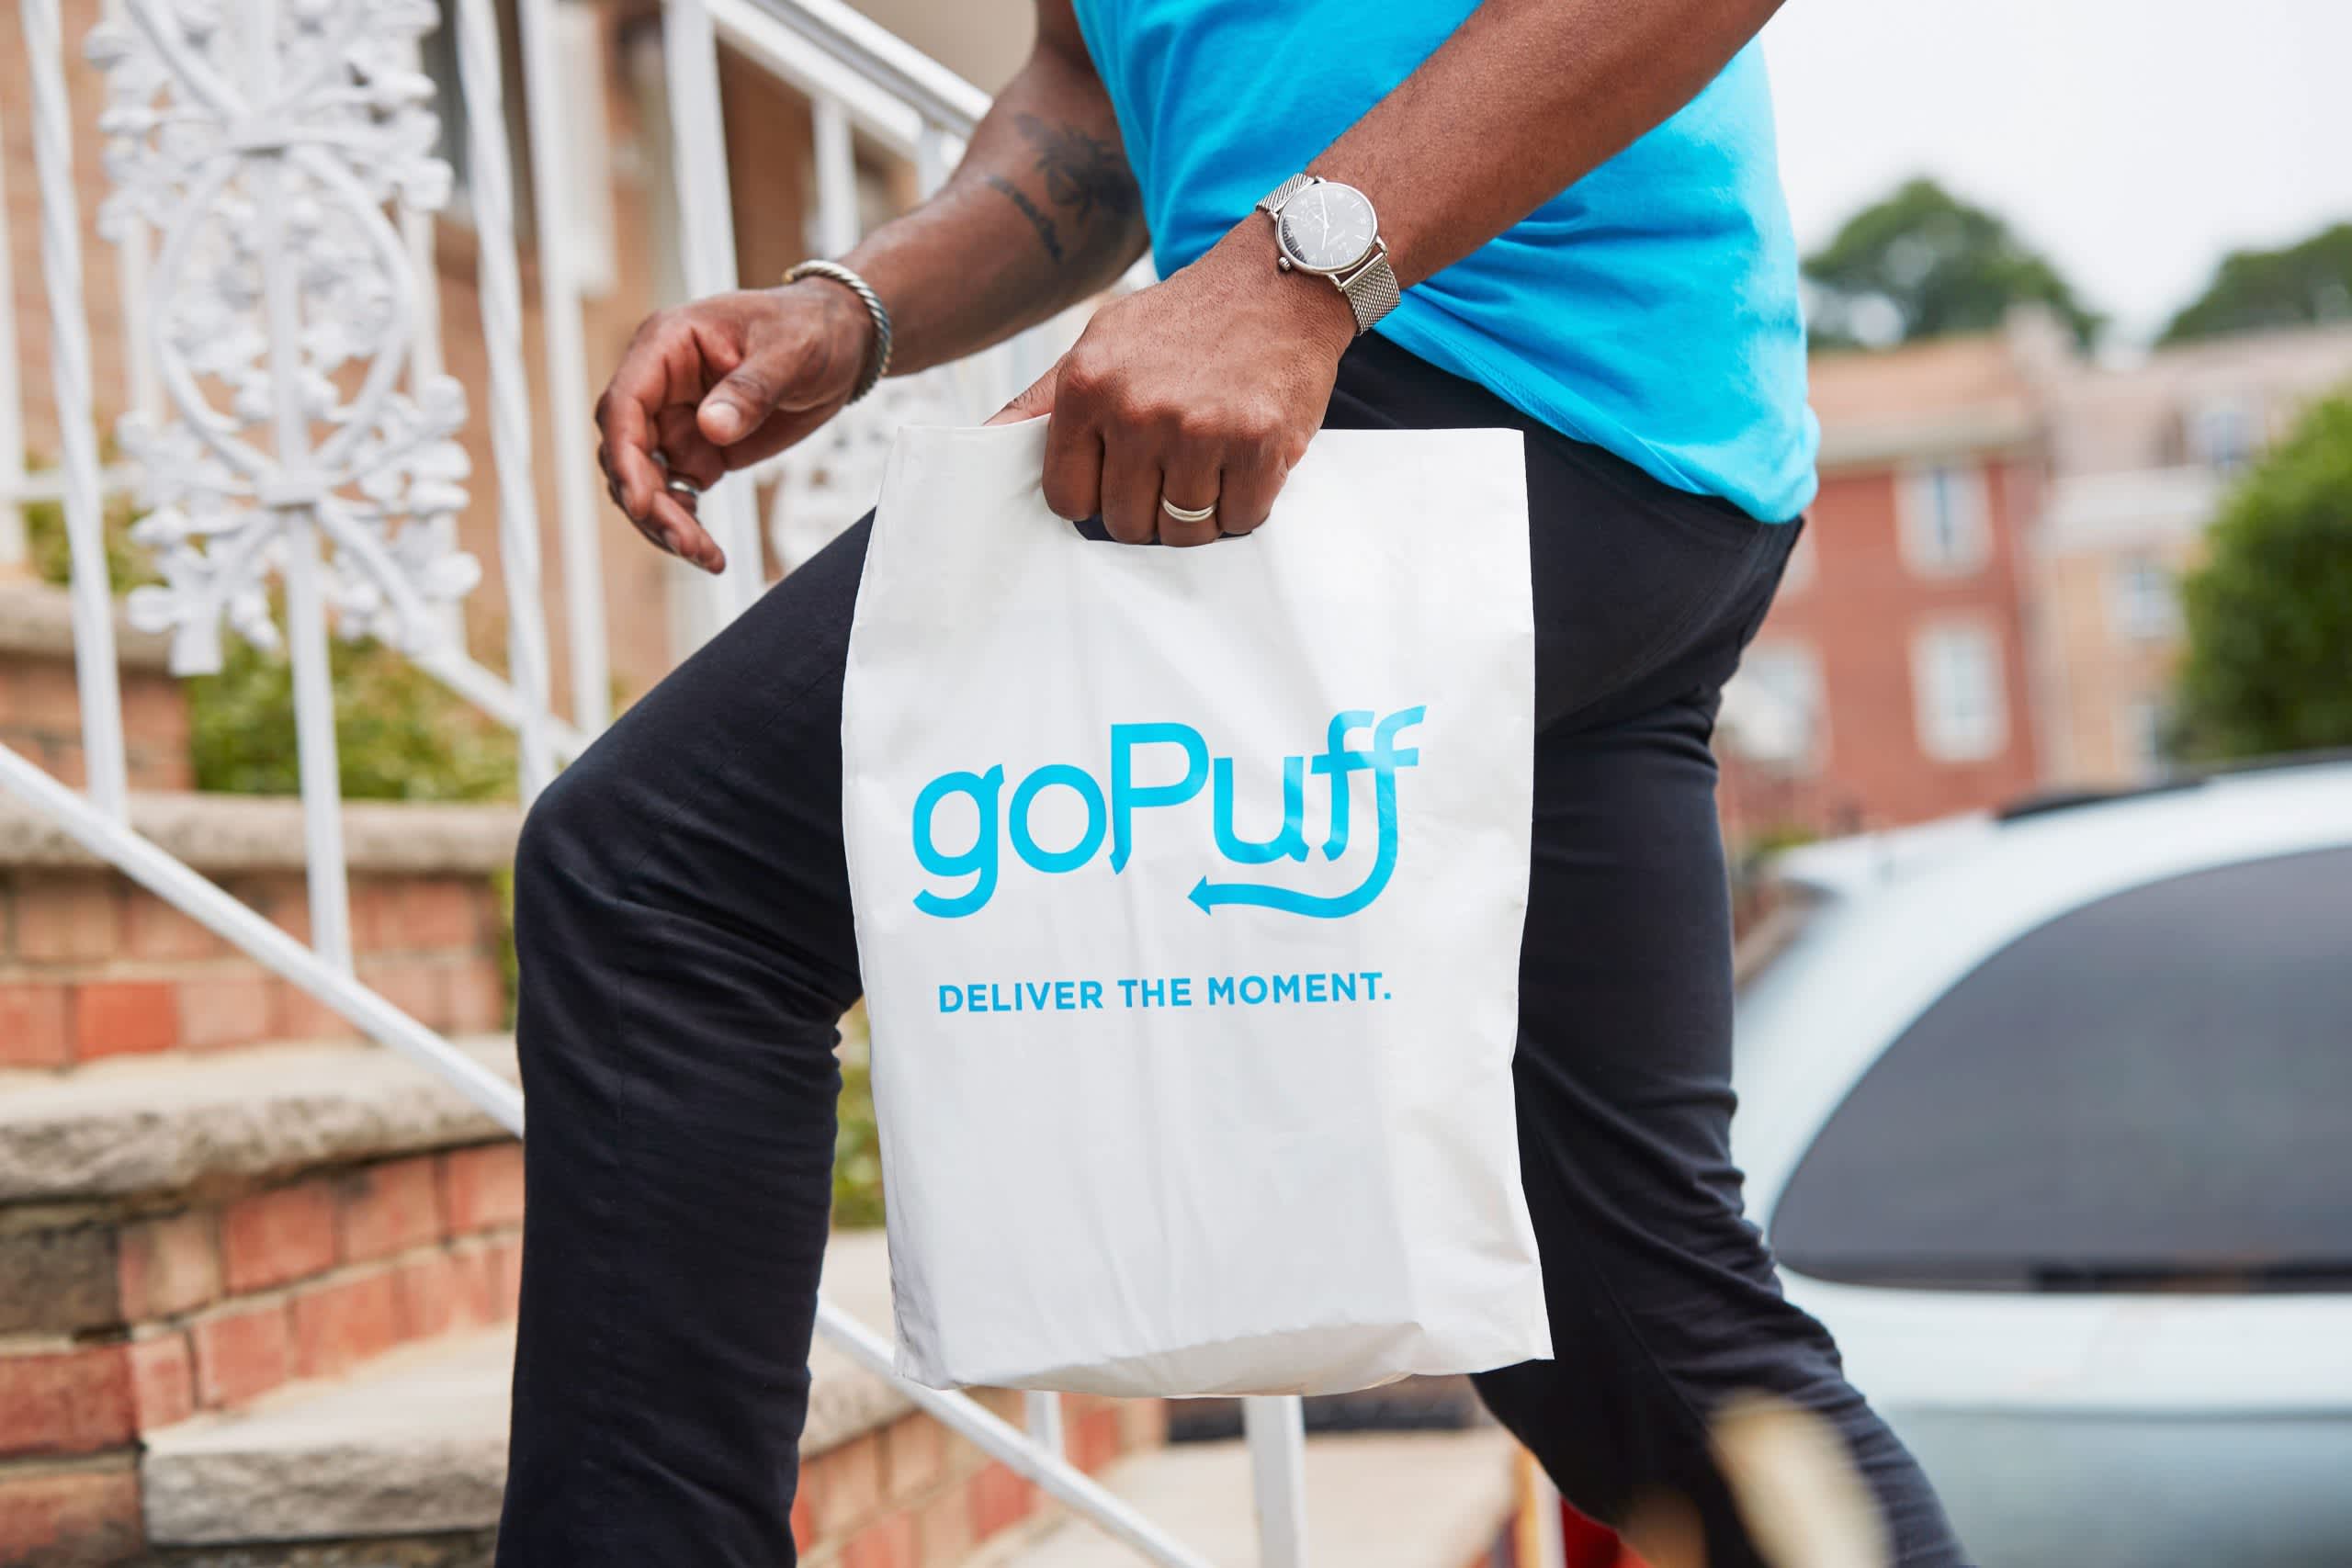 A Gopuff Driver Partner delivering a Gopuff bag of goodies